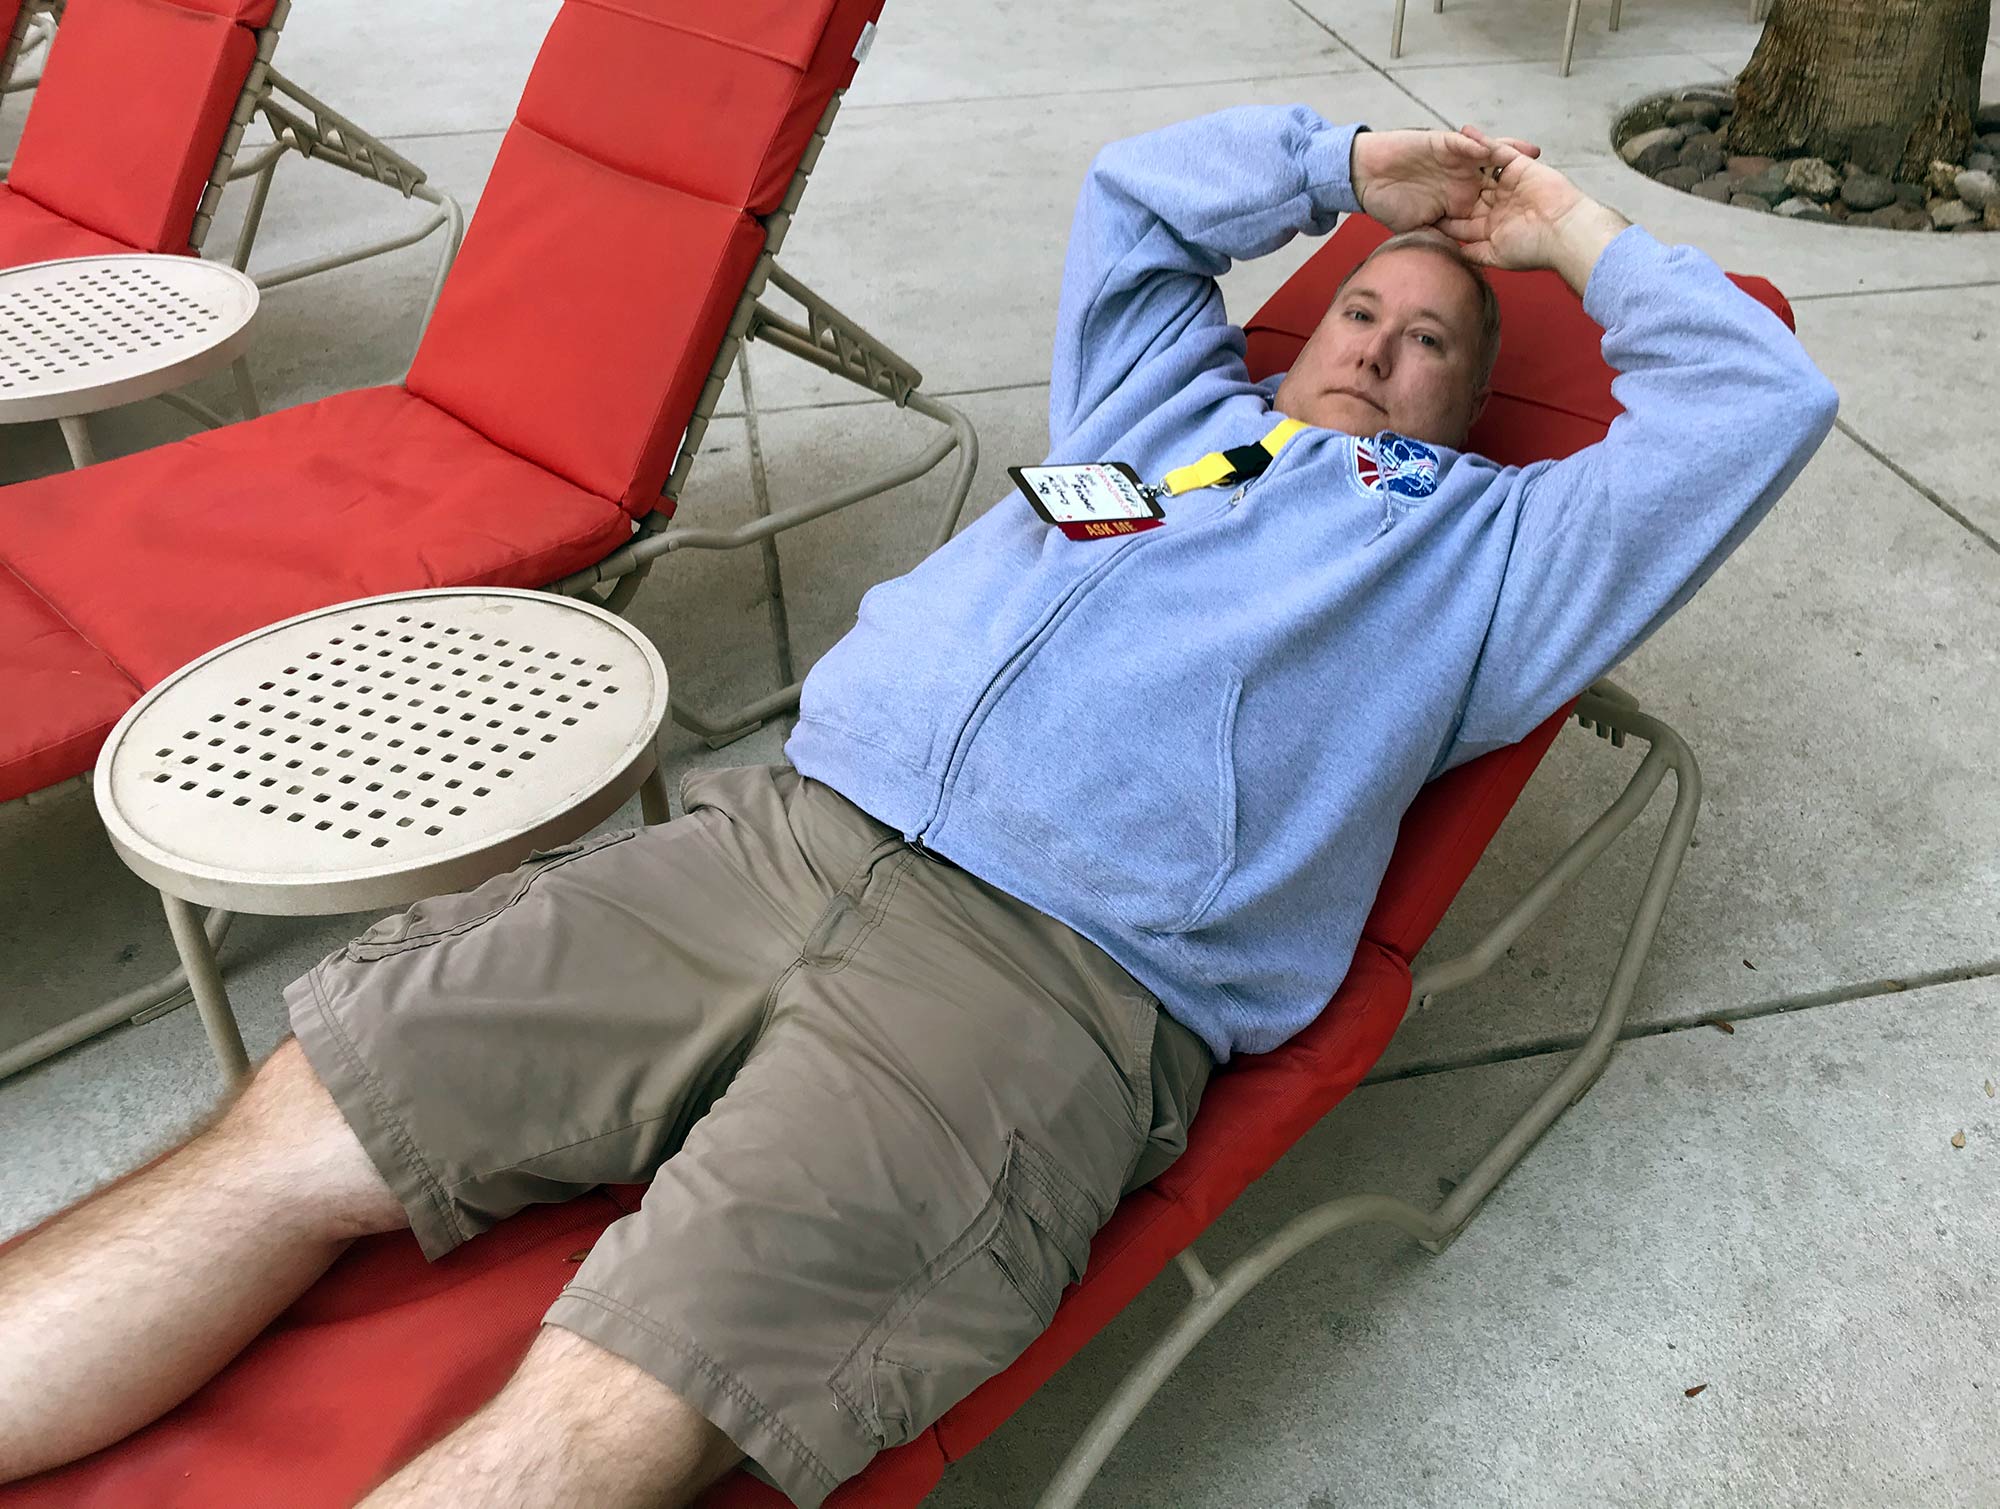 Author James Rosone tries to catch a moment of relaxation at poolside during the 20Books Vegas madness.